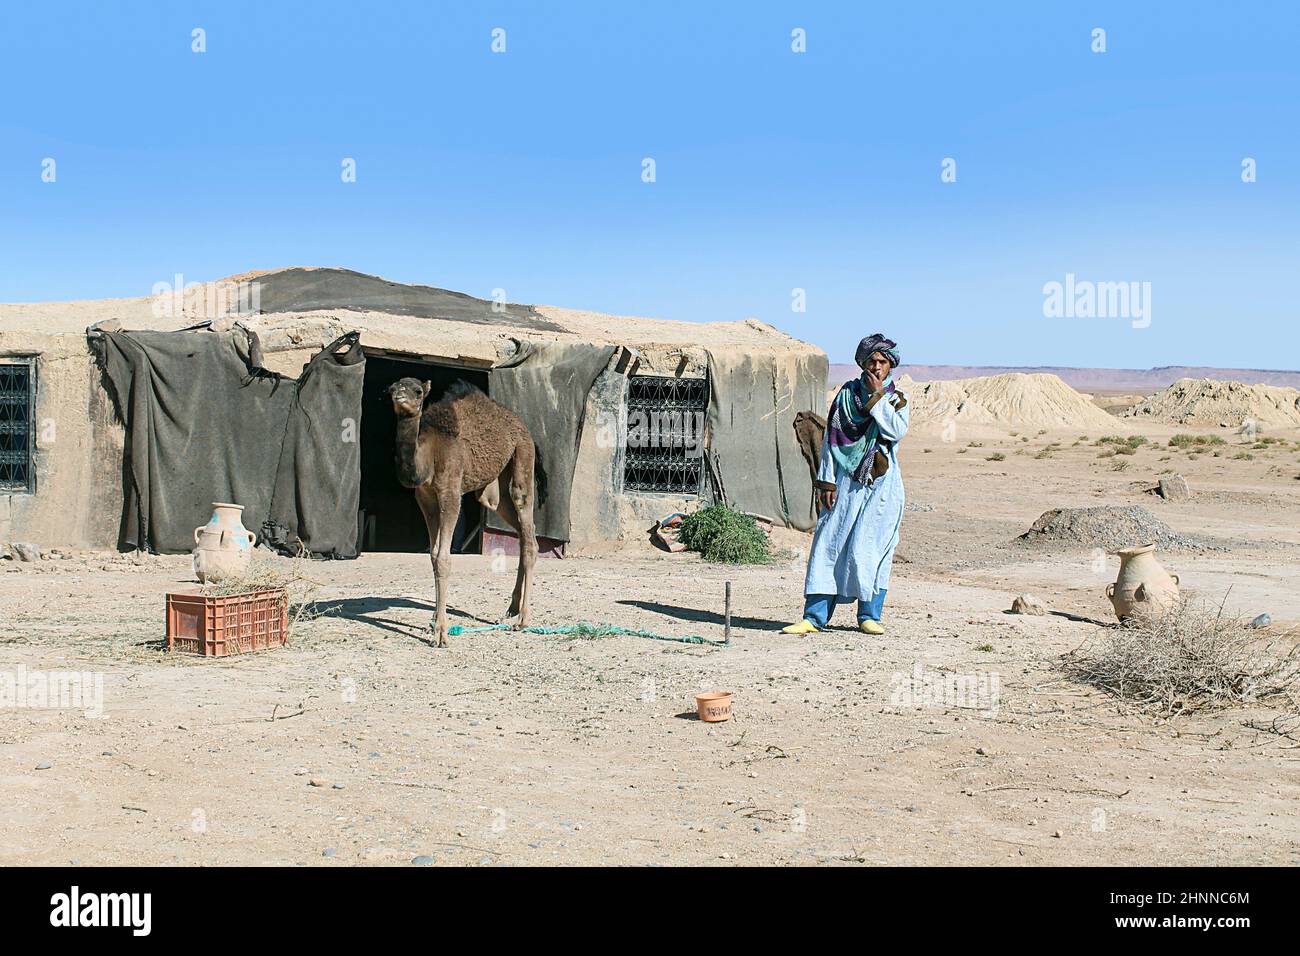 bedouin lives in his tent in the desert of Morocco with pot of water and a camel Stock Photo